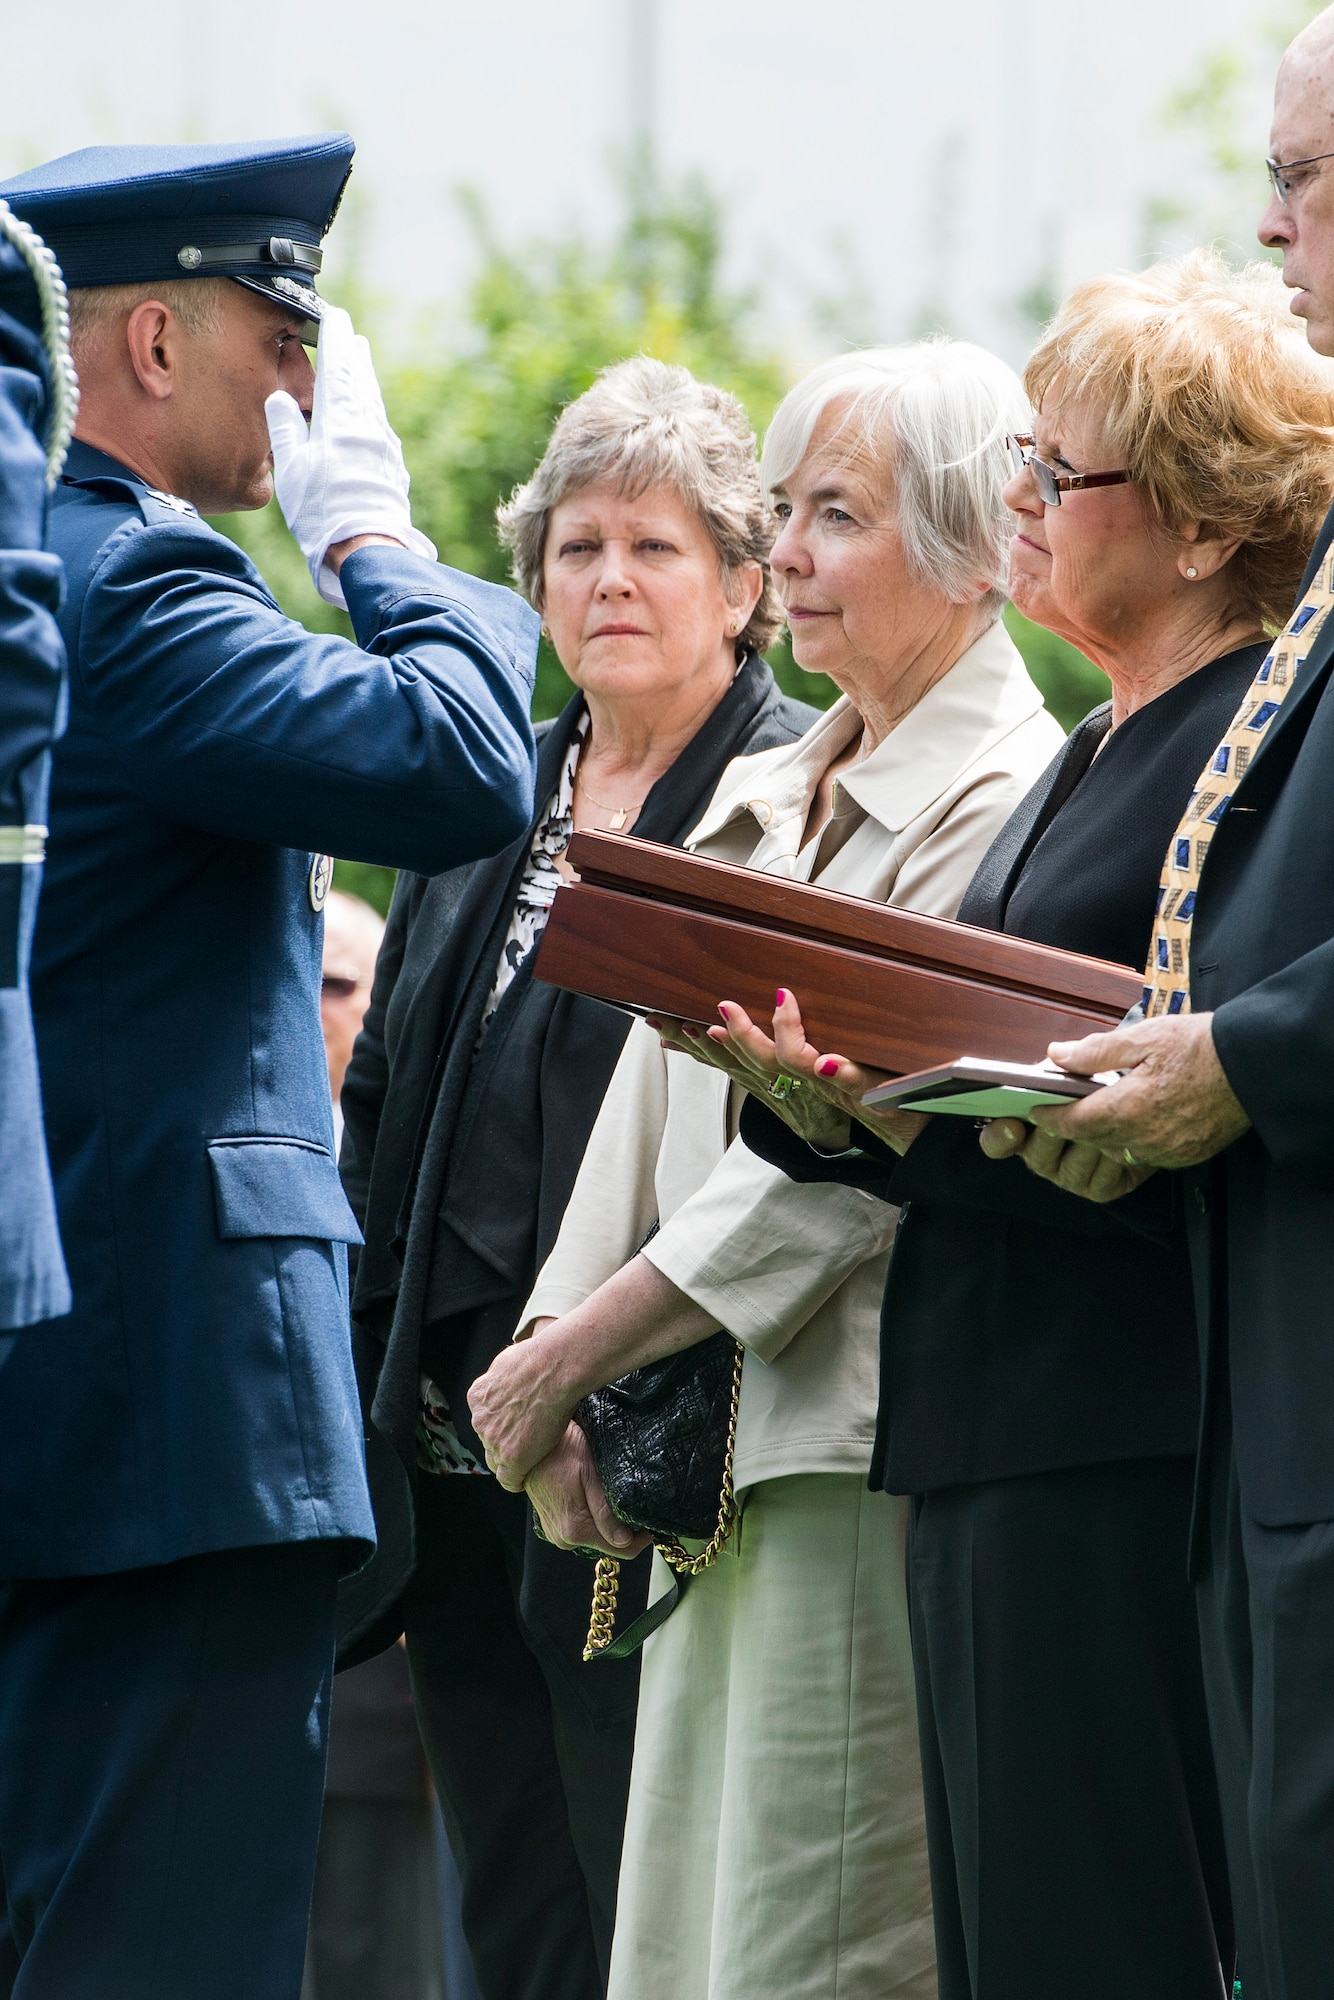 Col. Anthony Davit, 627th Air Base Group commander, salutes as he presents an encased flag to Sue Scott, sister of Air Force Capt. Douglas D. Ferguson May 2, 2014, in Lakewood, Wash. Ferguson's F-4D aircraft was shot down over Laos in 1969 and his remains were returned home after being missing for more than 44 years. (U.S. Air Force photo/Tech. Sgt. Sean Tobin)